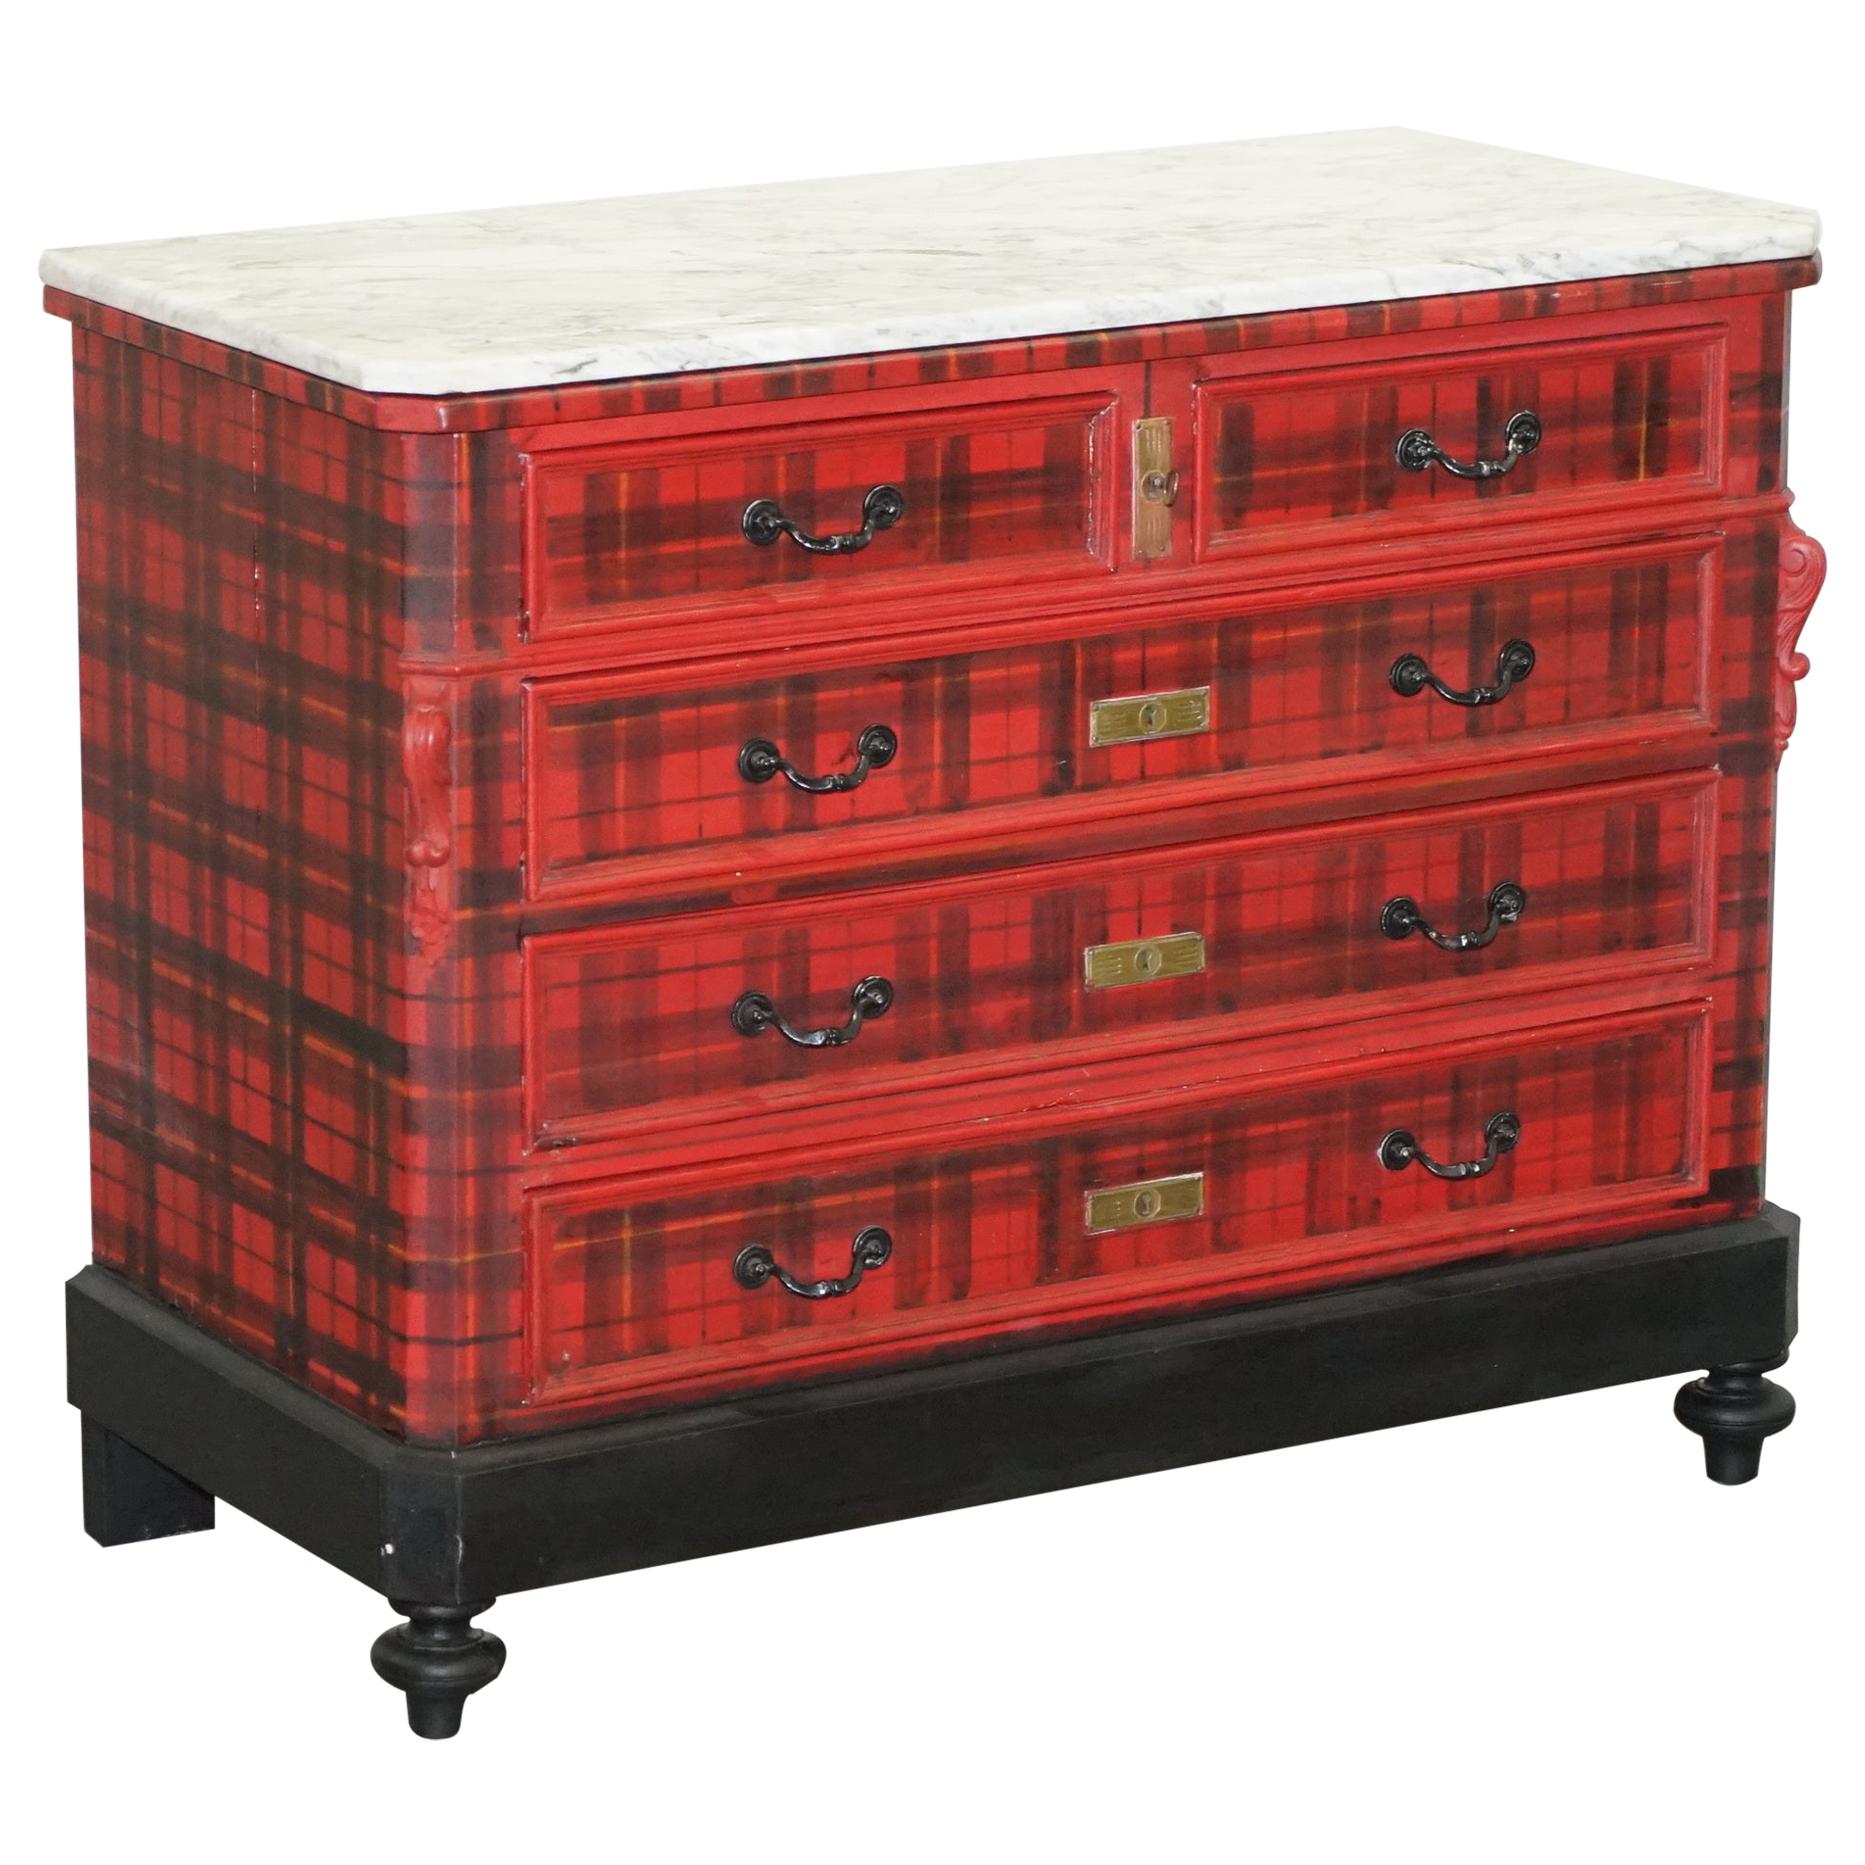 Lovely Original Victorian Chest of Drawers with Scottish Tartan Wrap, Marble Top